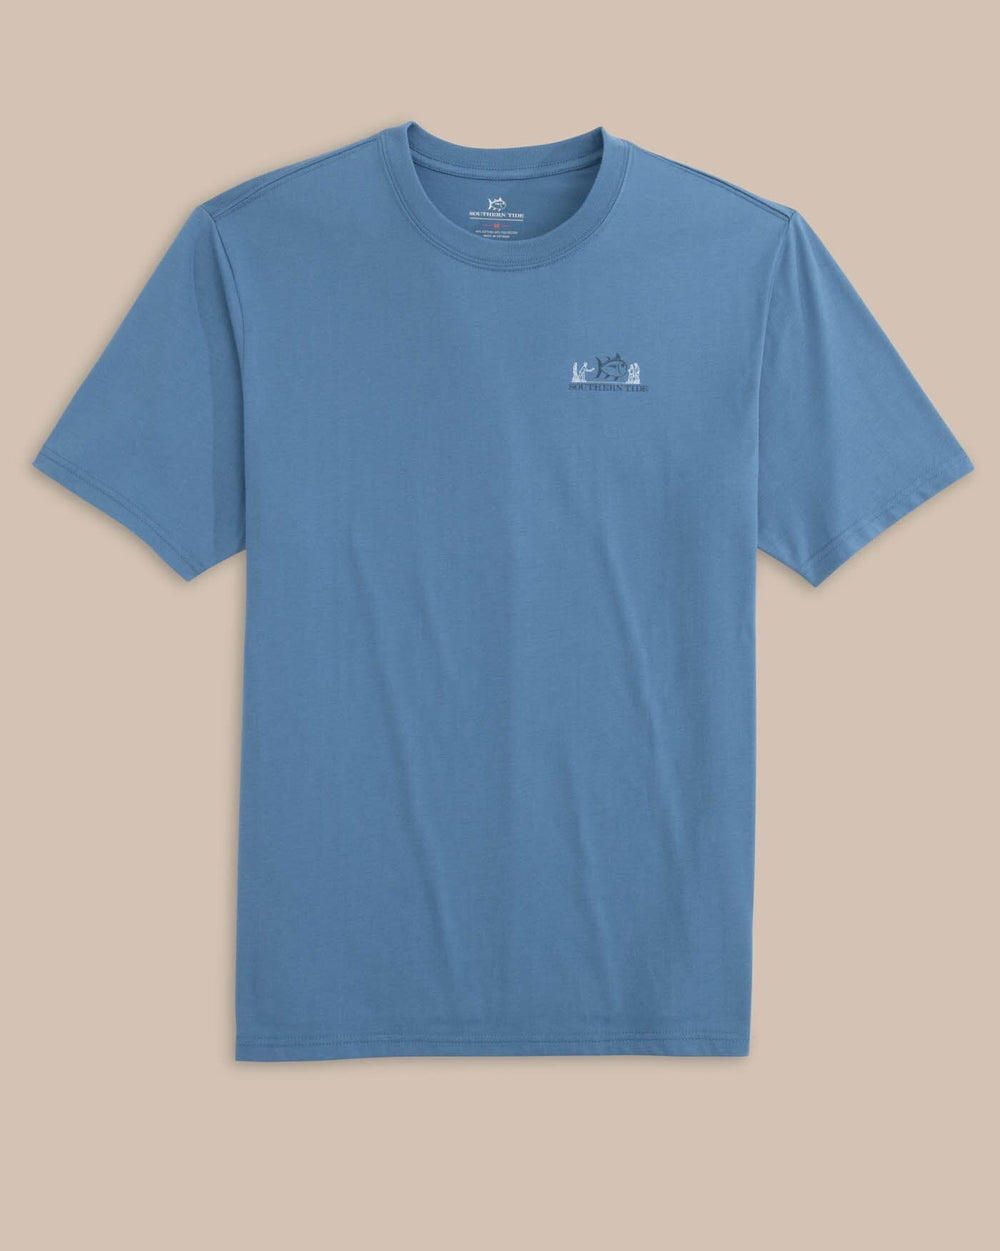 The front view of the Southern Tide How-To Cornhole Short Sleeve T-shirt by Southern Tide - Coronet Blue